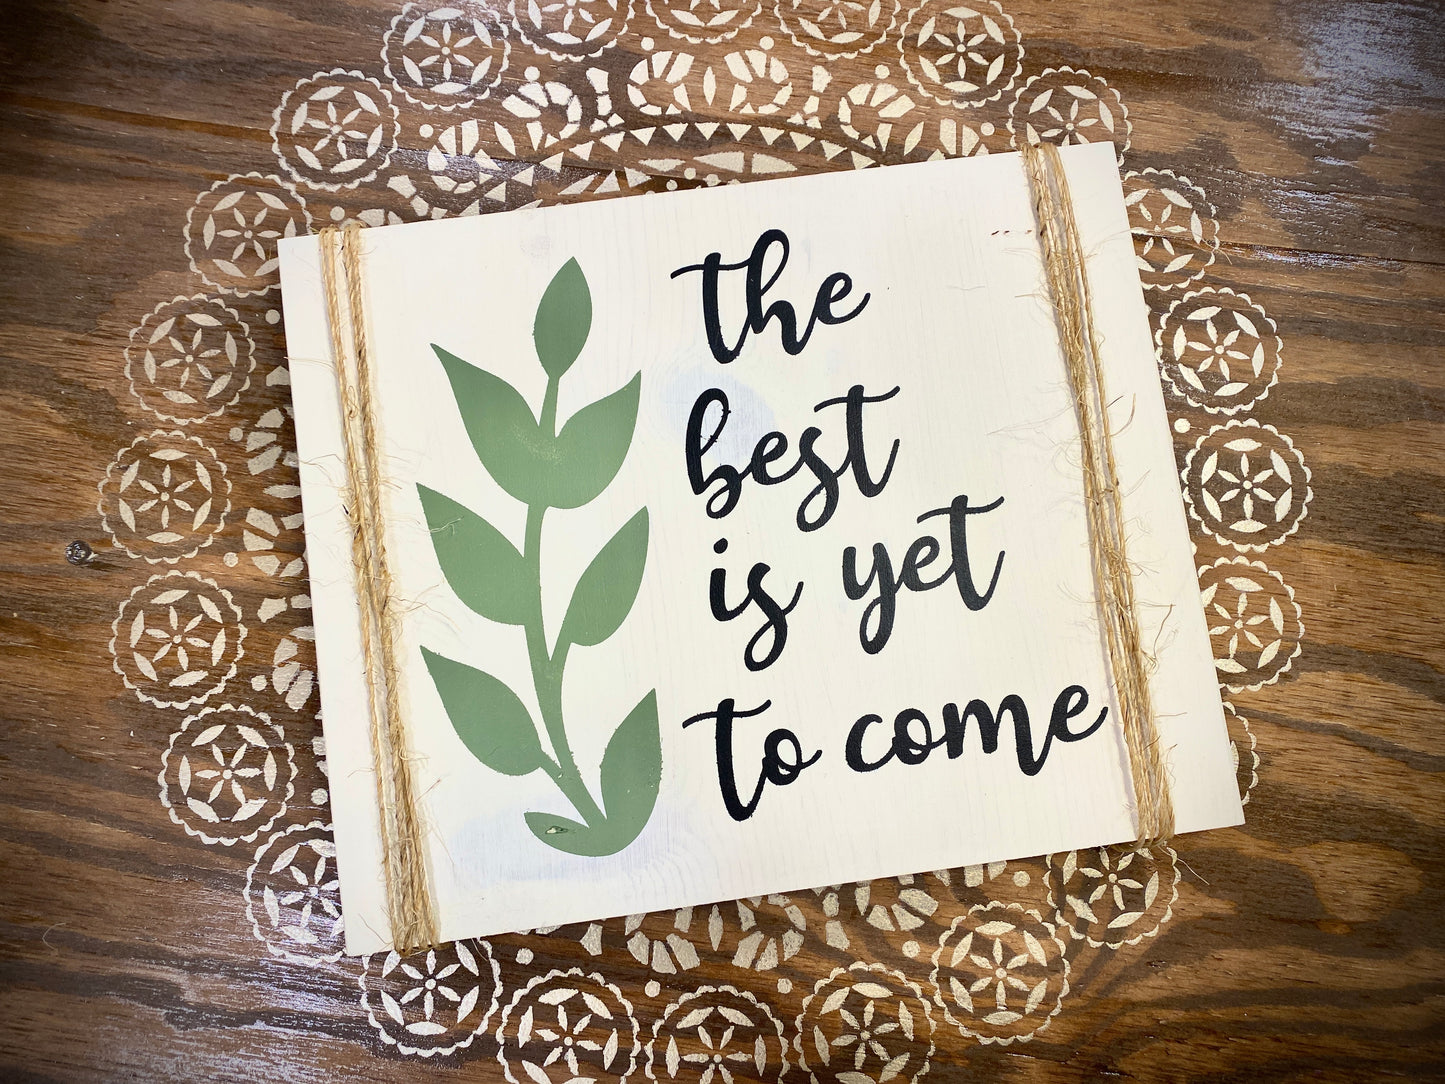 “The best is yet to come” DIY Wood Sign Kit!